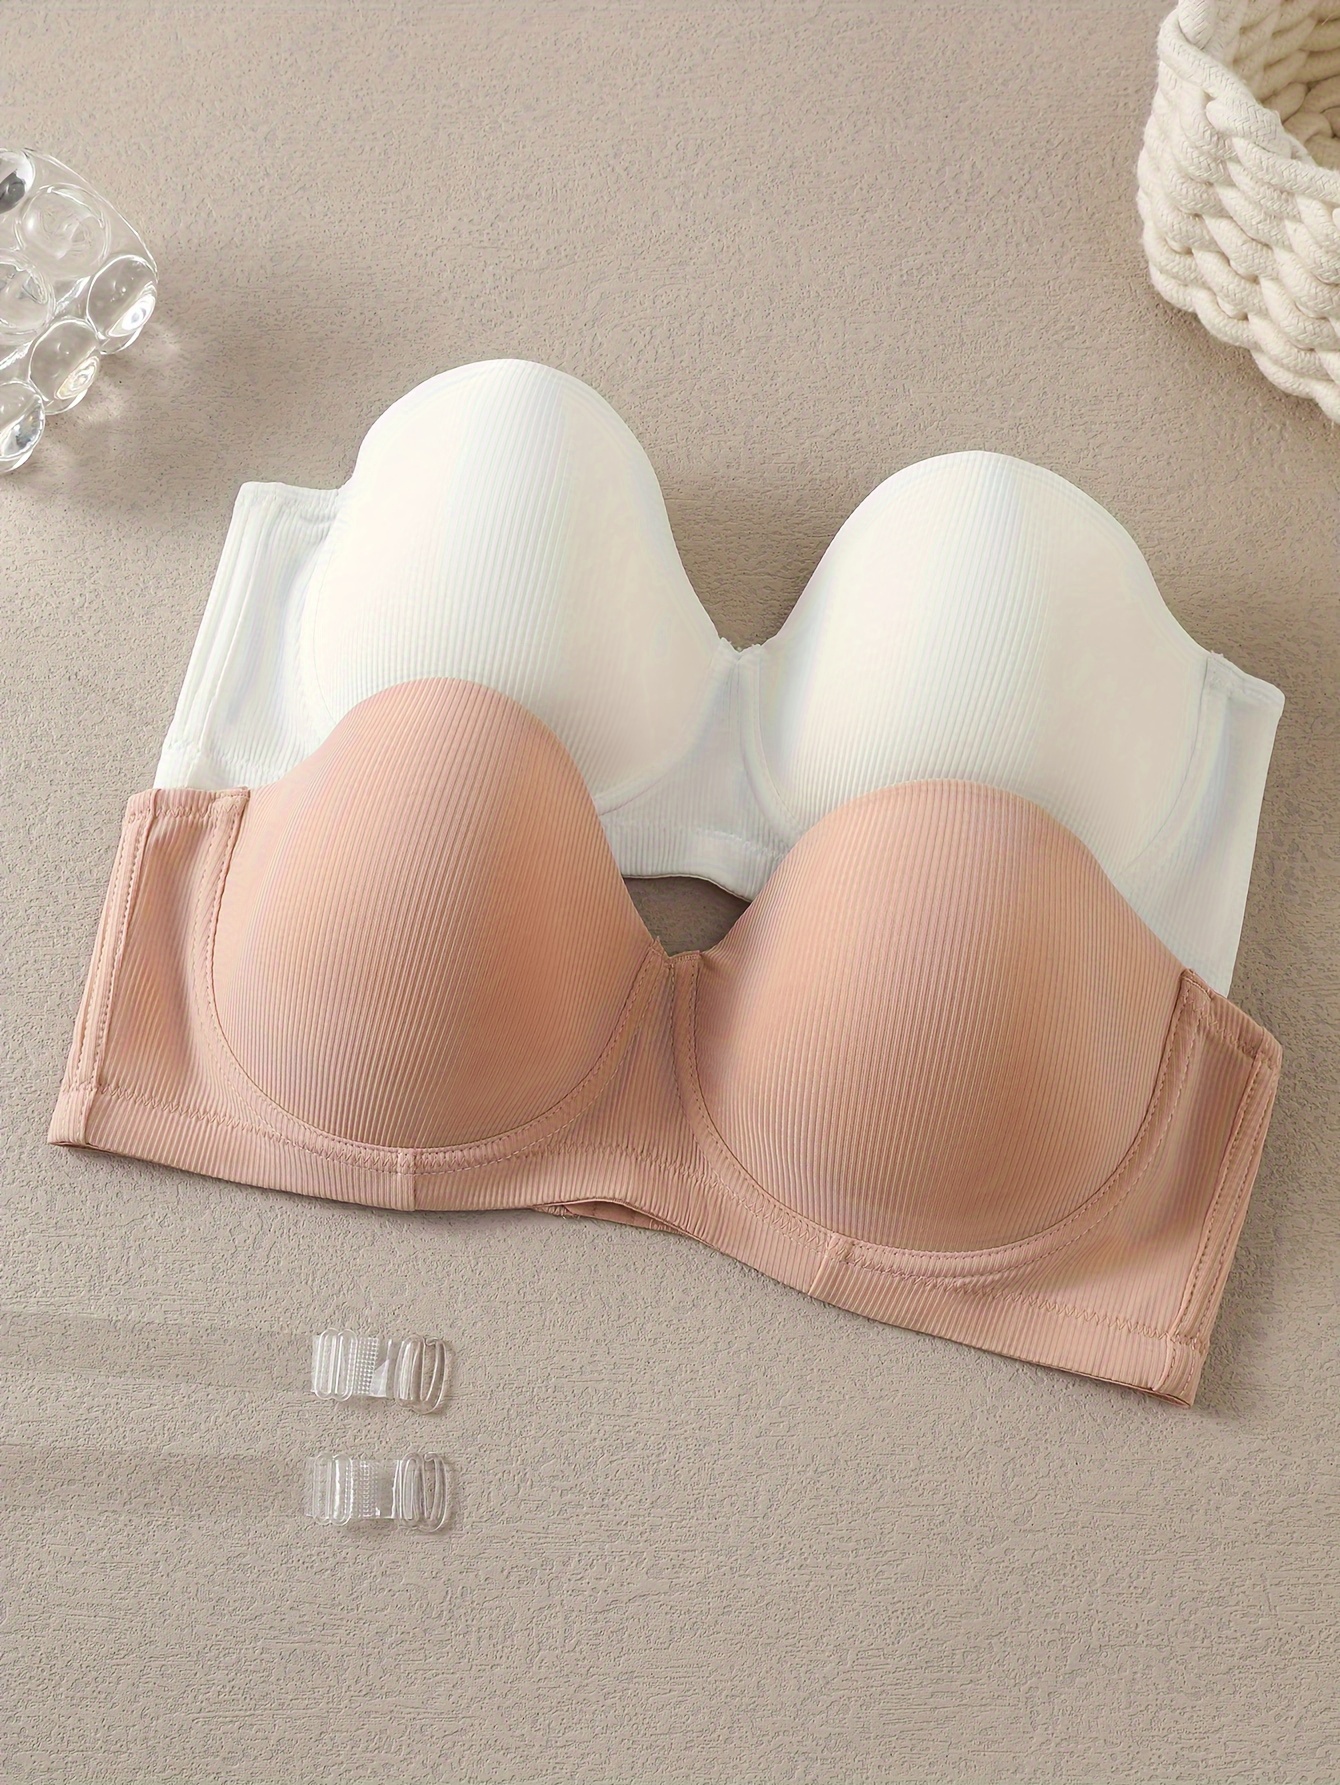 Sexy Dent Push Up Bra Women Invisible Bras Underwear Lingerie For